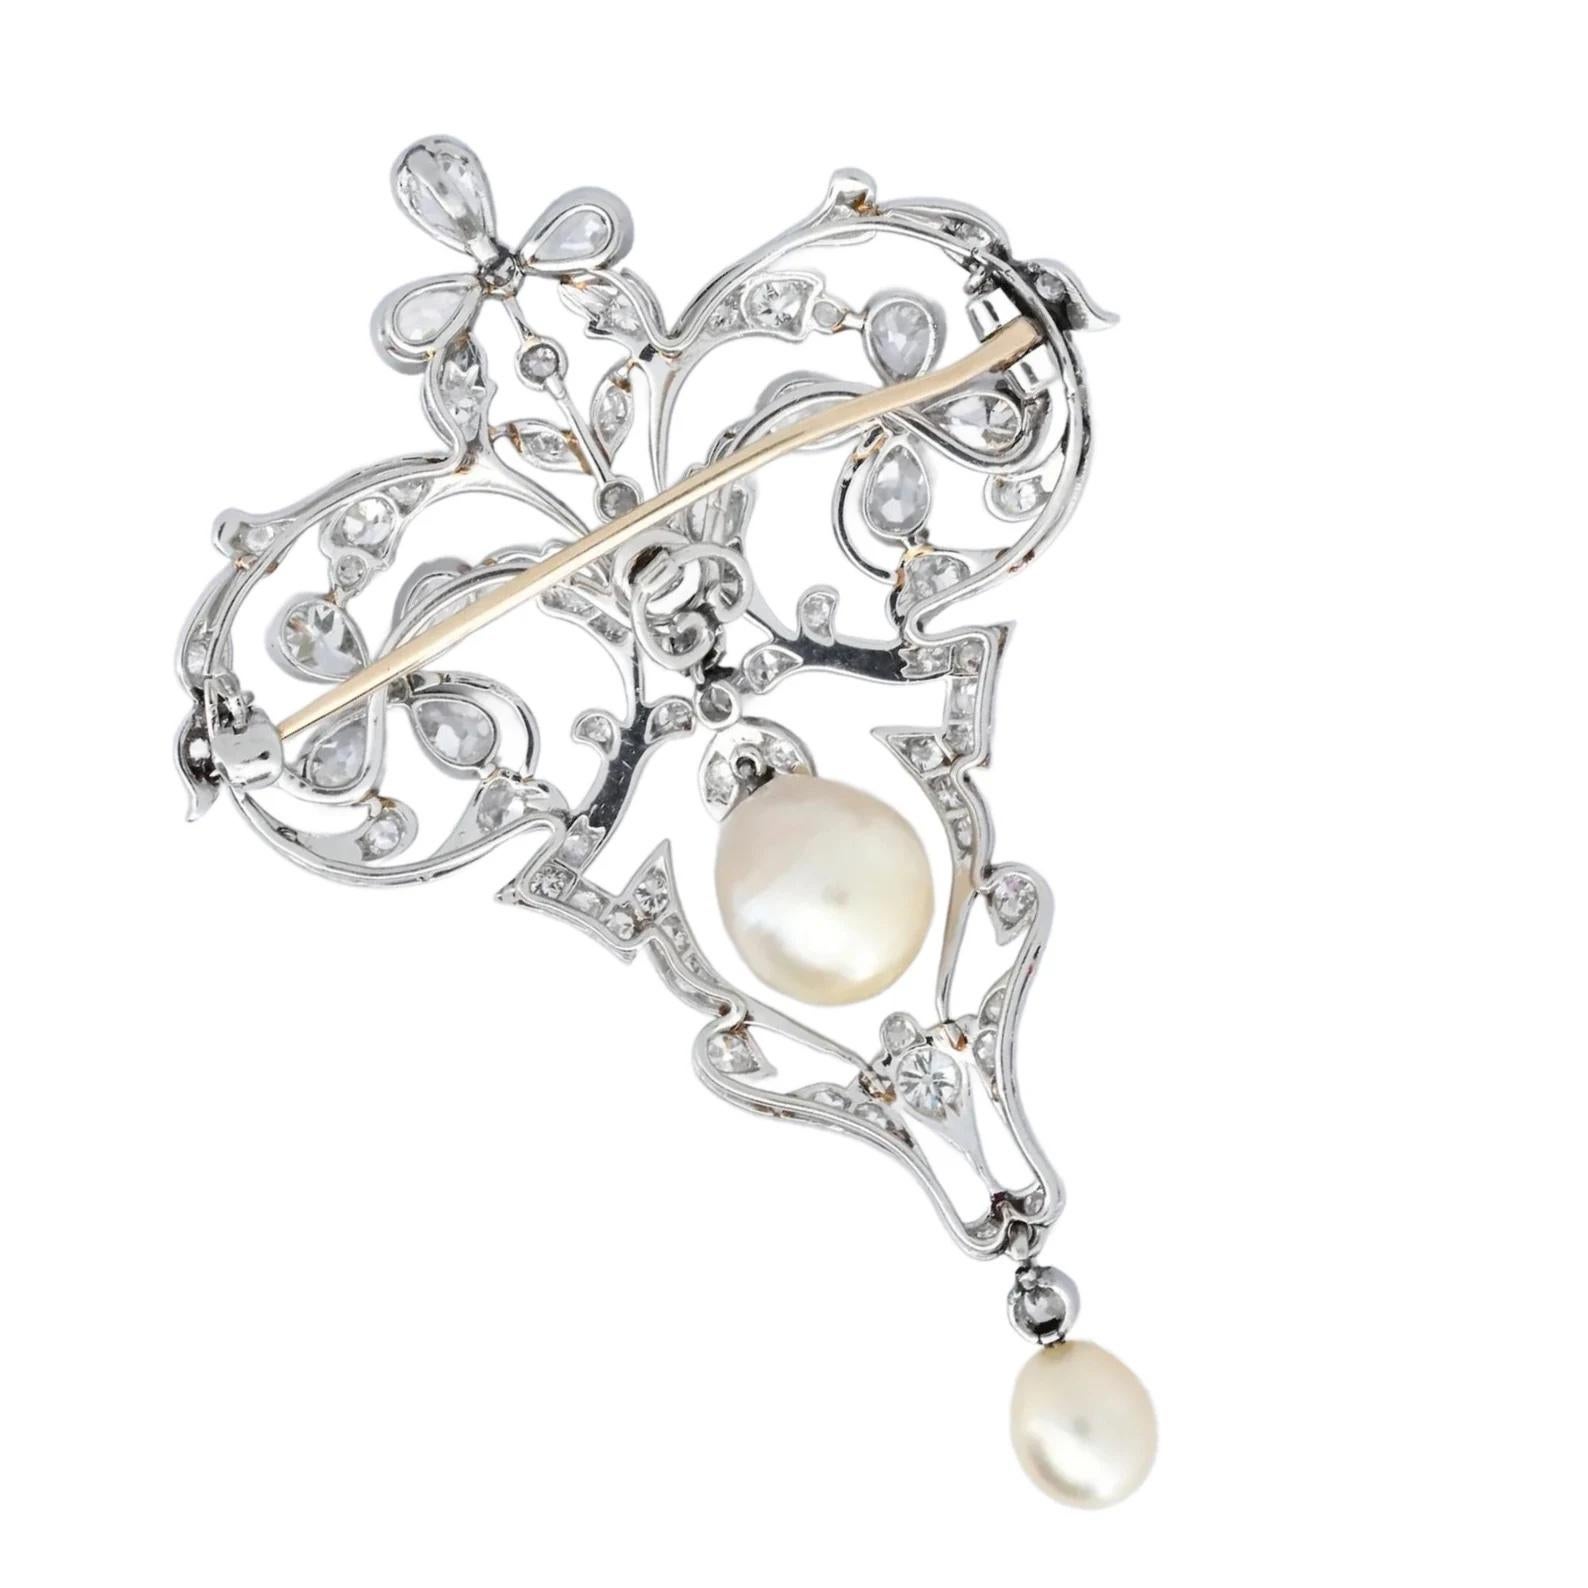 An exquisite natural pearl and diamond convertible pendant brooch in platinum.

Centered by cream colored Natural Saltwater Pearls measuring 8.93 by 8.01mm and 6.00mm. The pearls of even cream color with strong lustre and smooth surfaces.

Set in